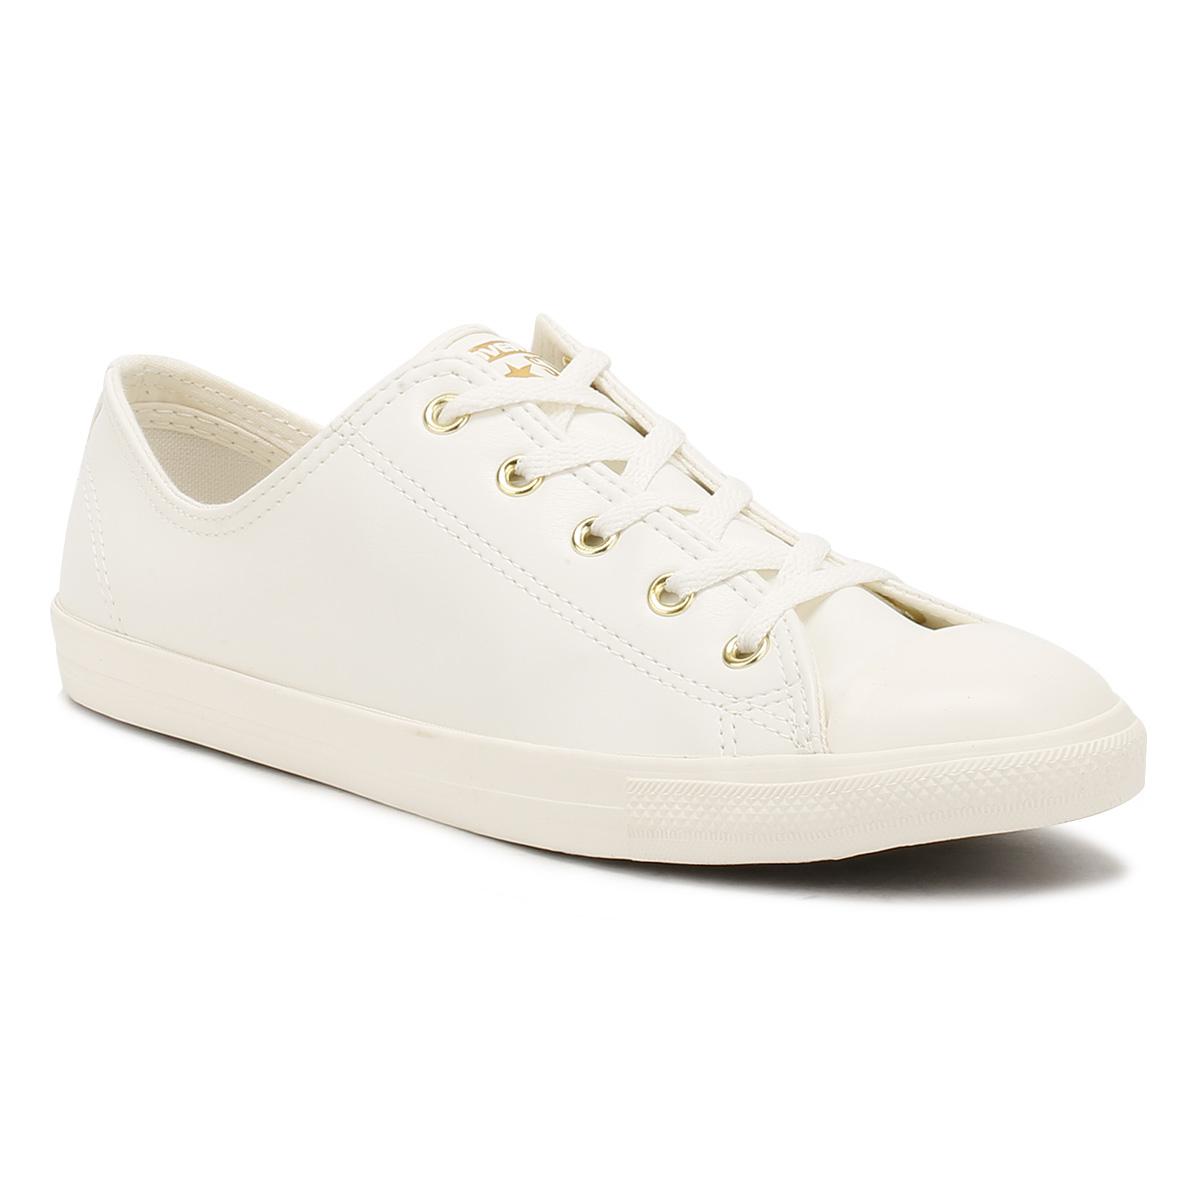 converse all star dainty ox white leather